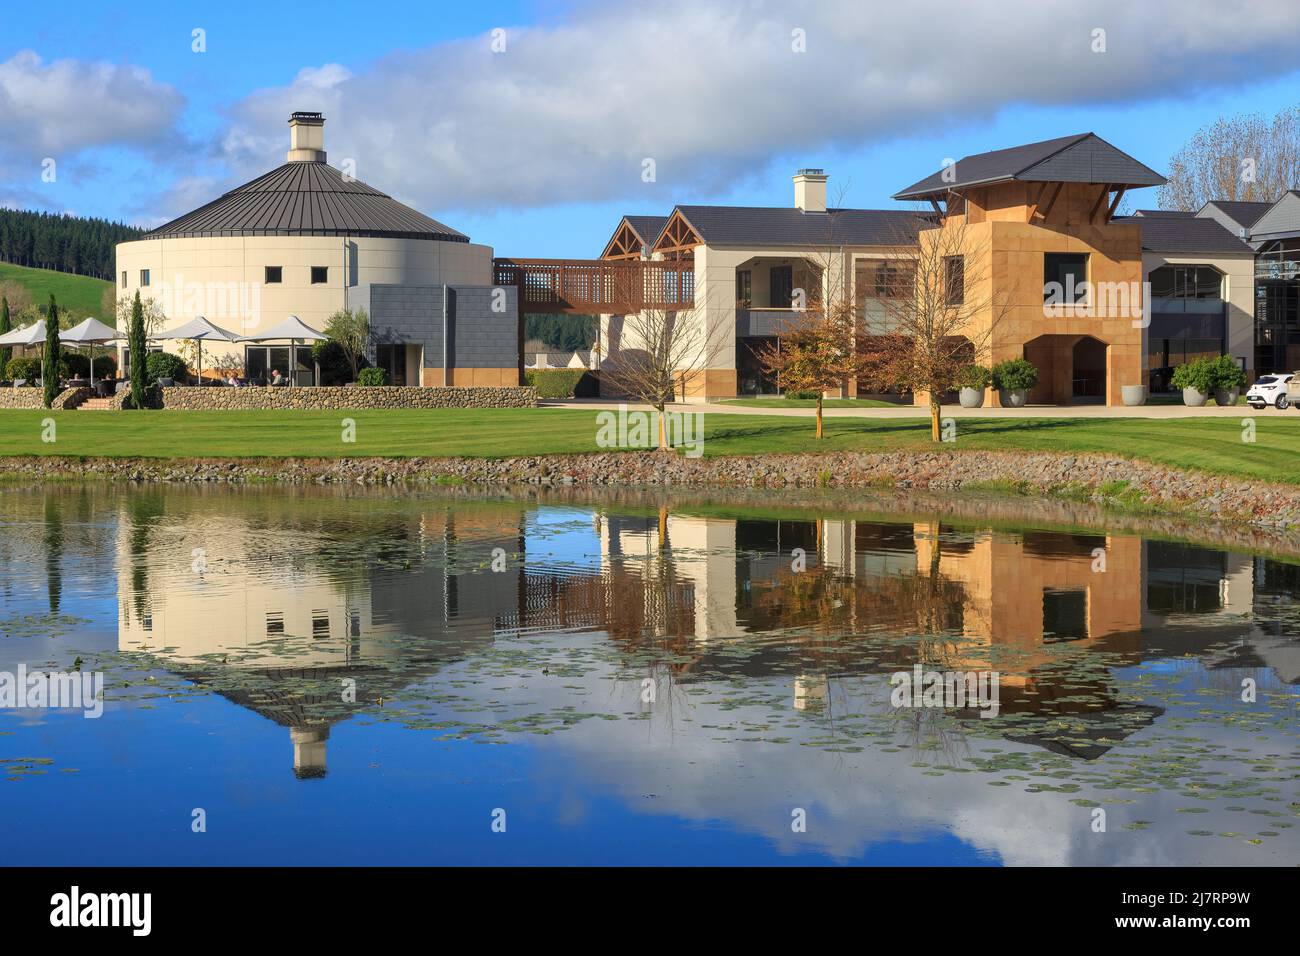 The restaurant at Craggy Ridge Winery in the Hawke's Bay region, New Zealand, reflected in the winery's ornamental lake Stock Photo